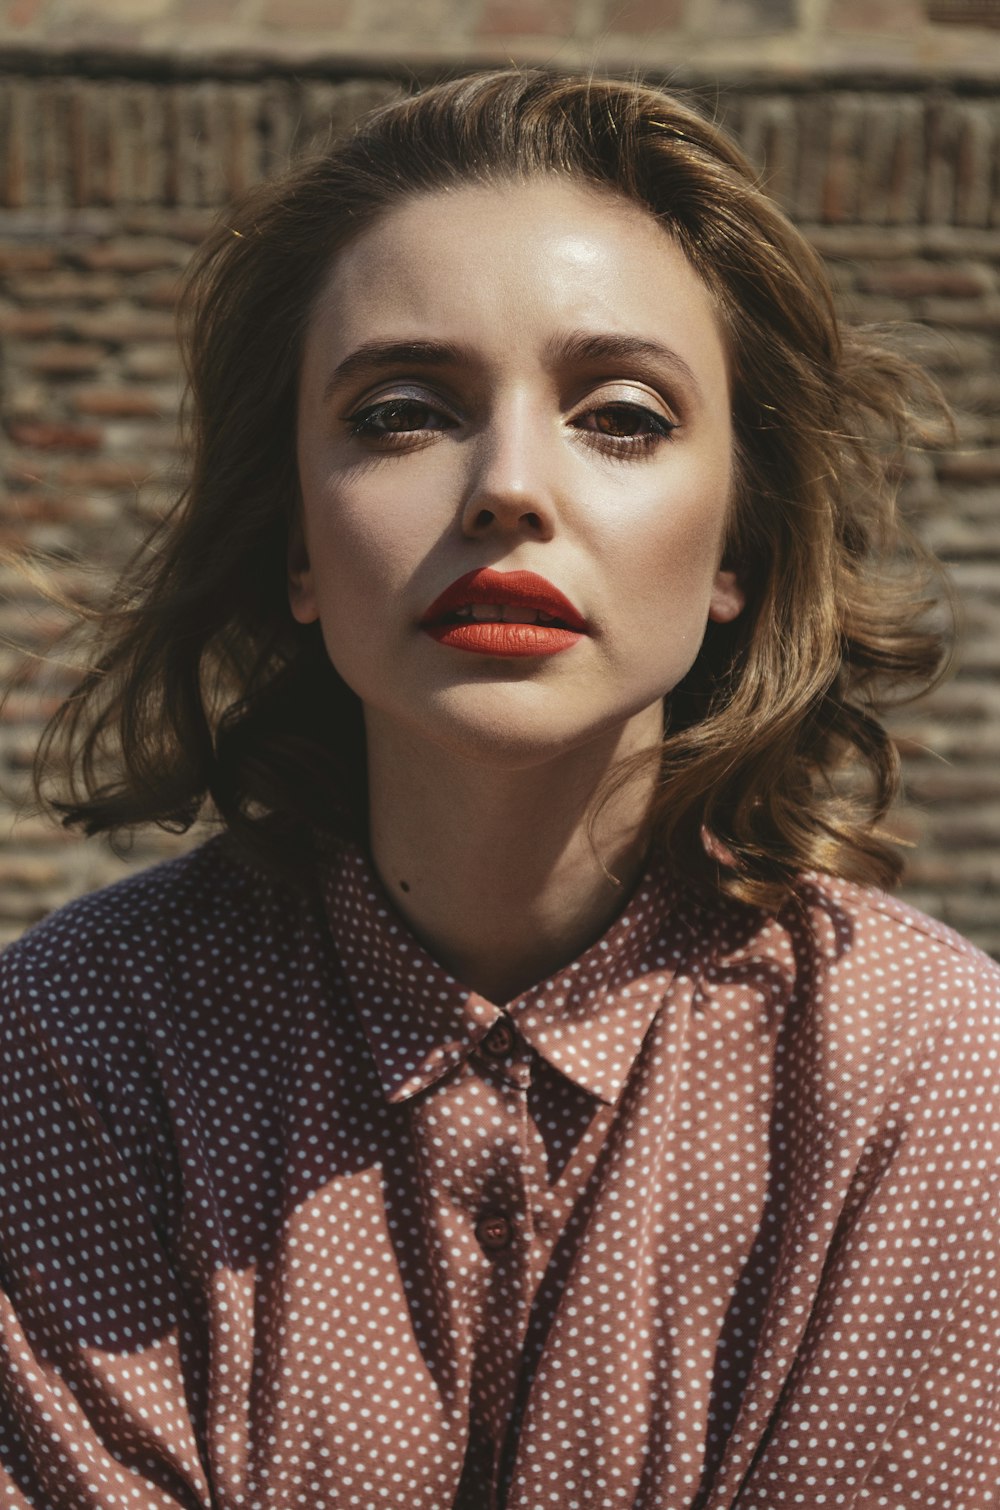 a woman in a shirt and tie with red lipstick